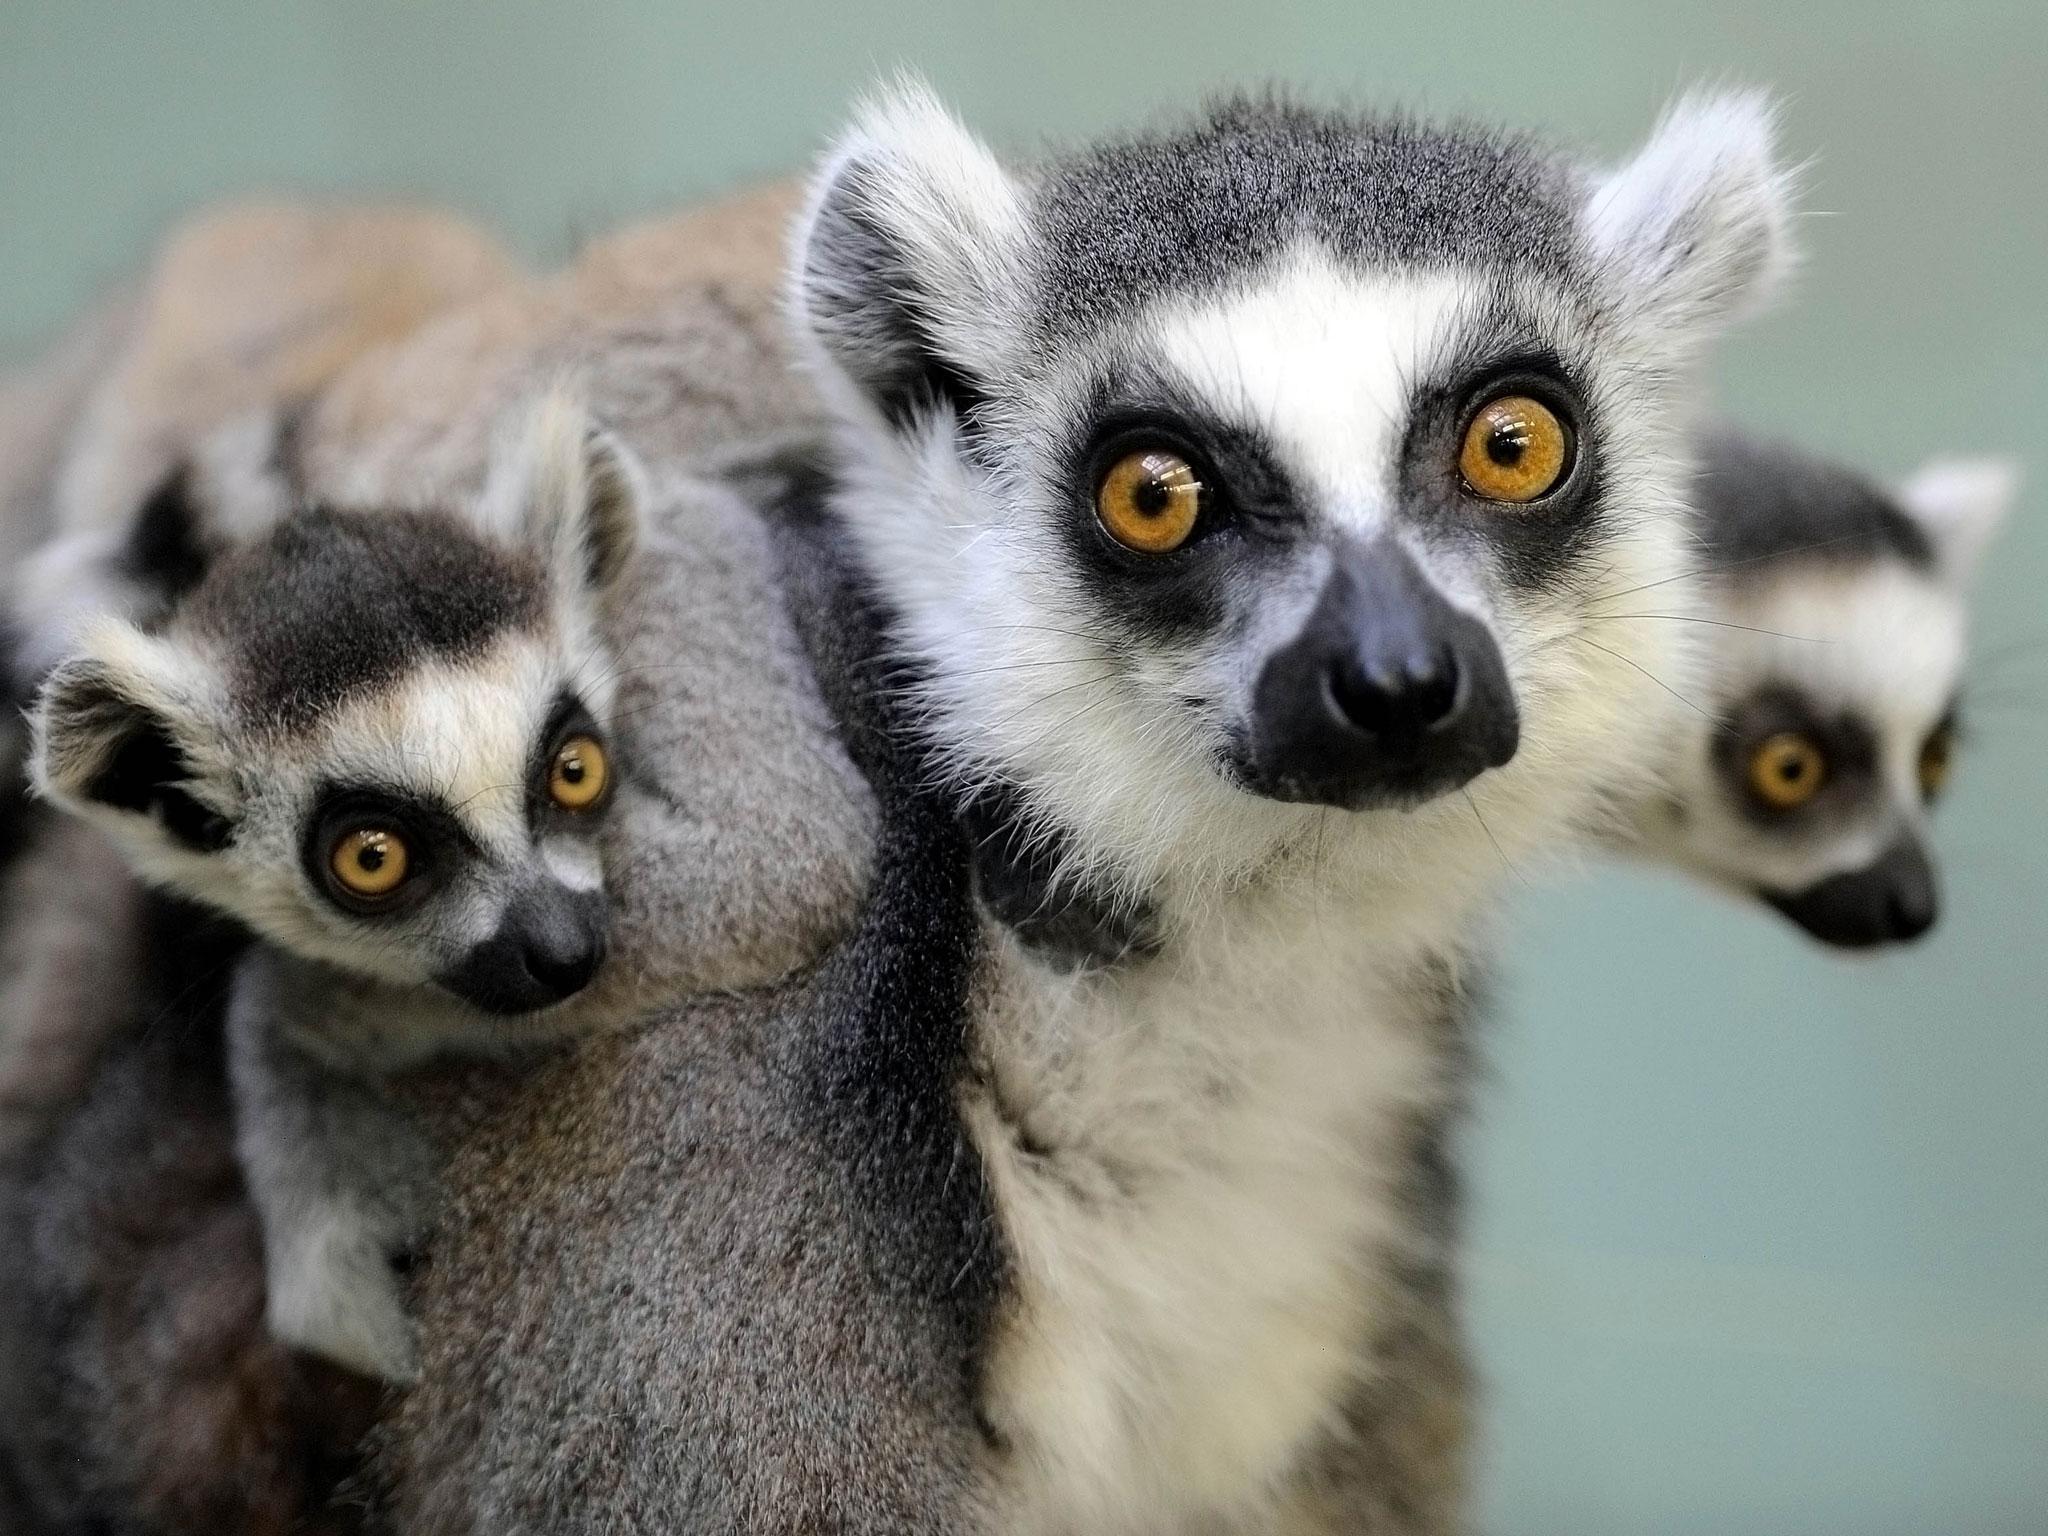 Two ring-tailed lemur babies sit on their mother's back.